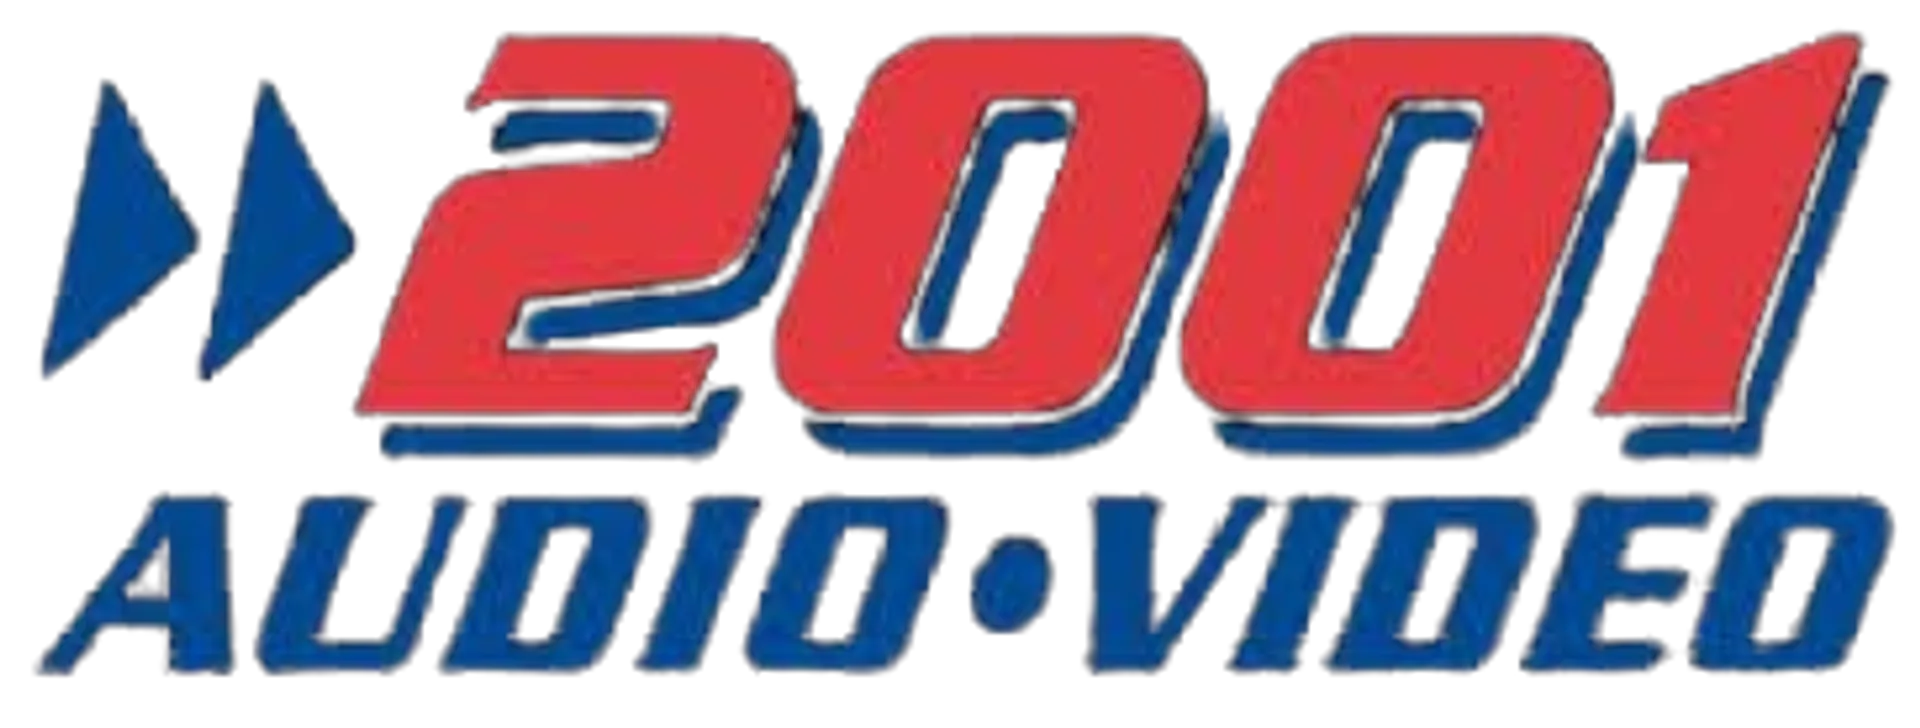 2001 AUDIO VIDEO logo. Current weekly ad